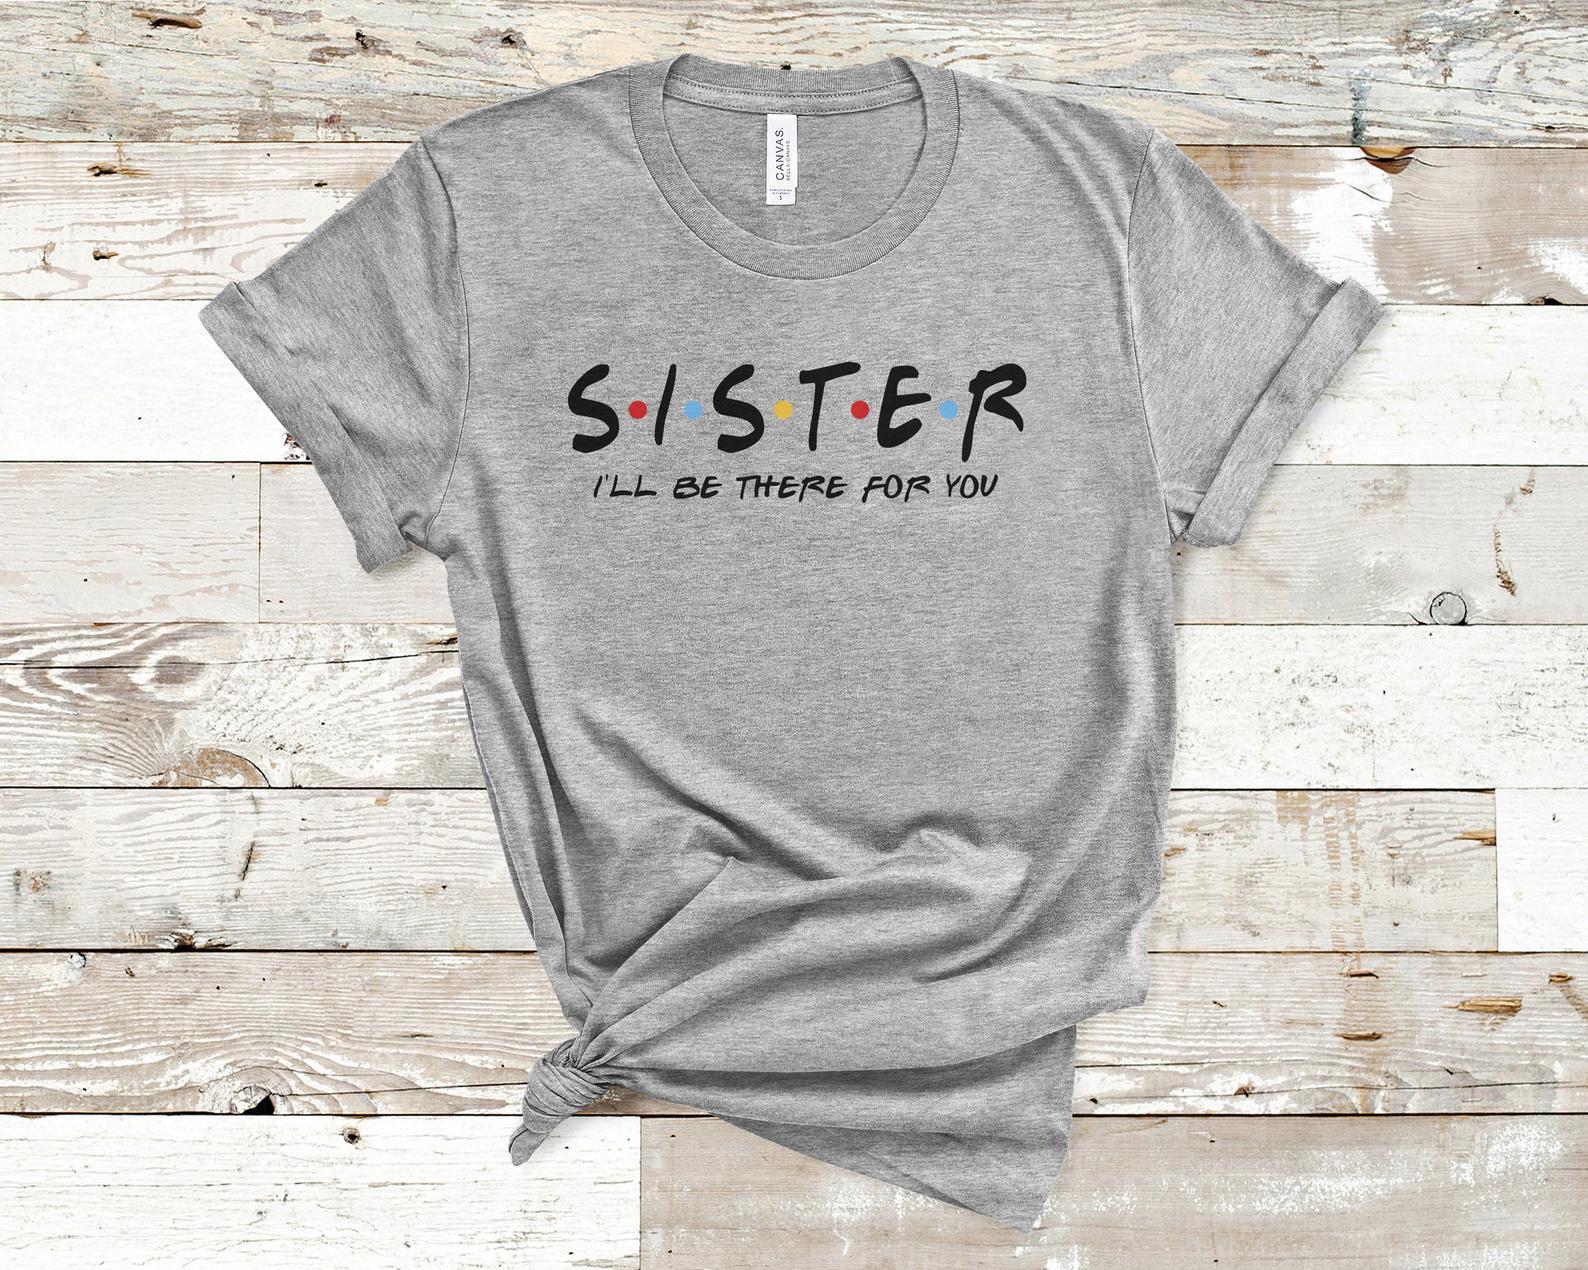 Sister I'll be there for you T-shirt